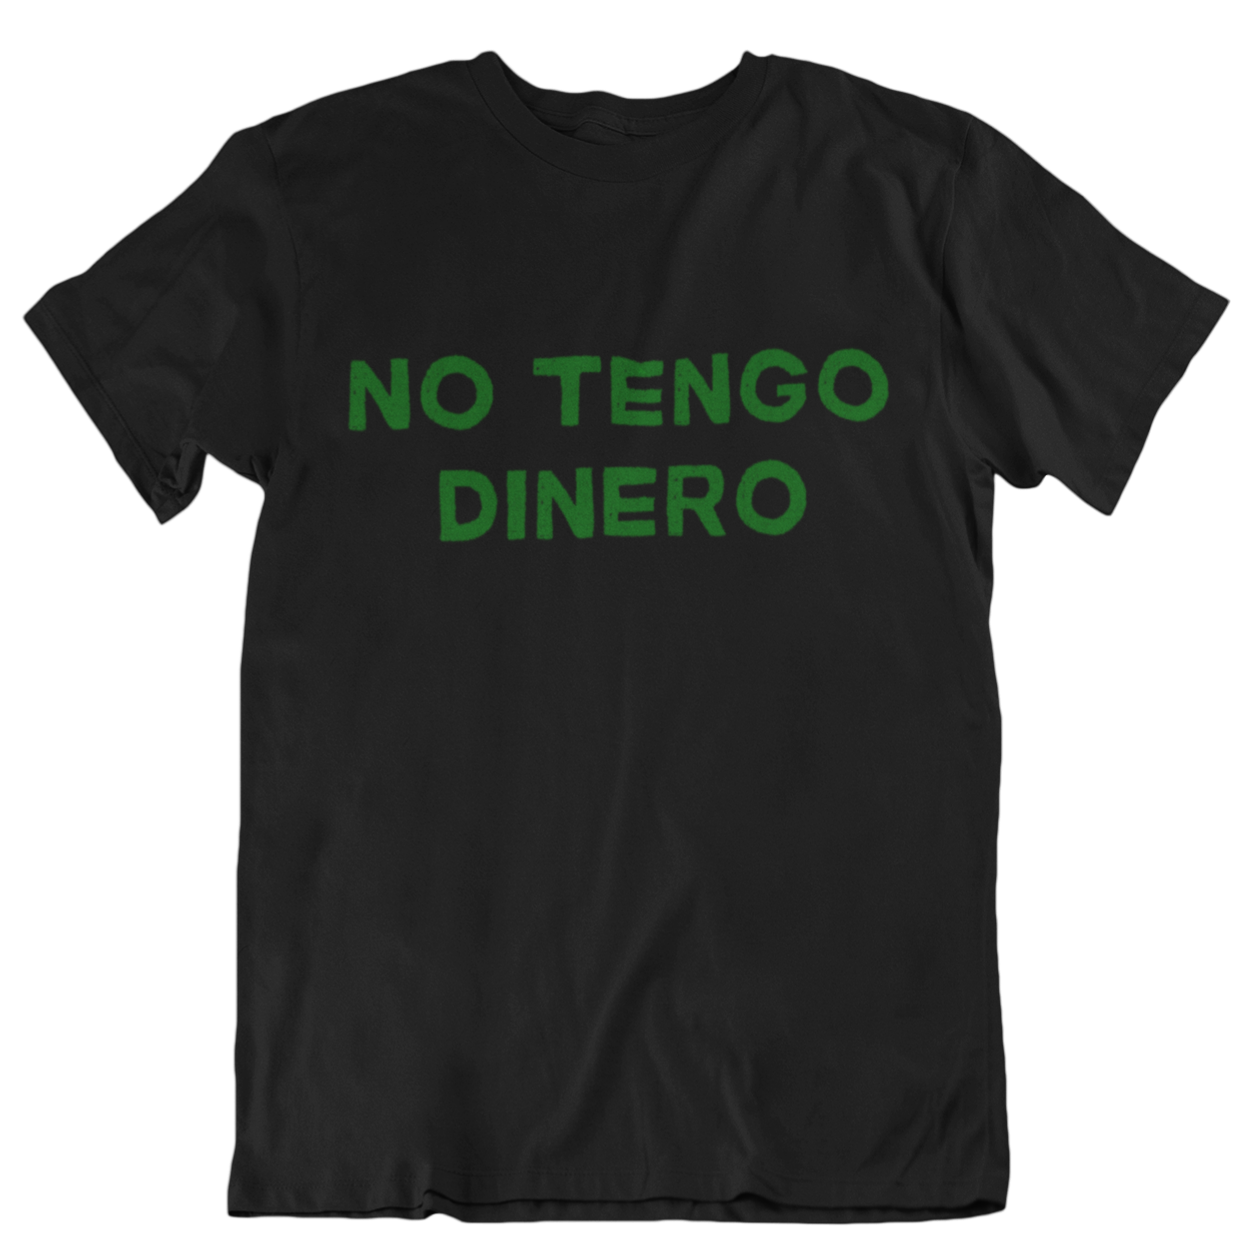 Black t-shirt with the name of the song by kumbia kings in green reading 'no tengo dinero'